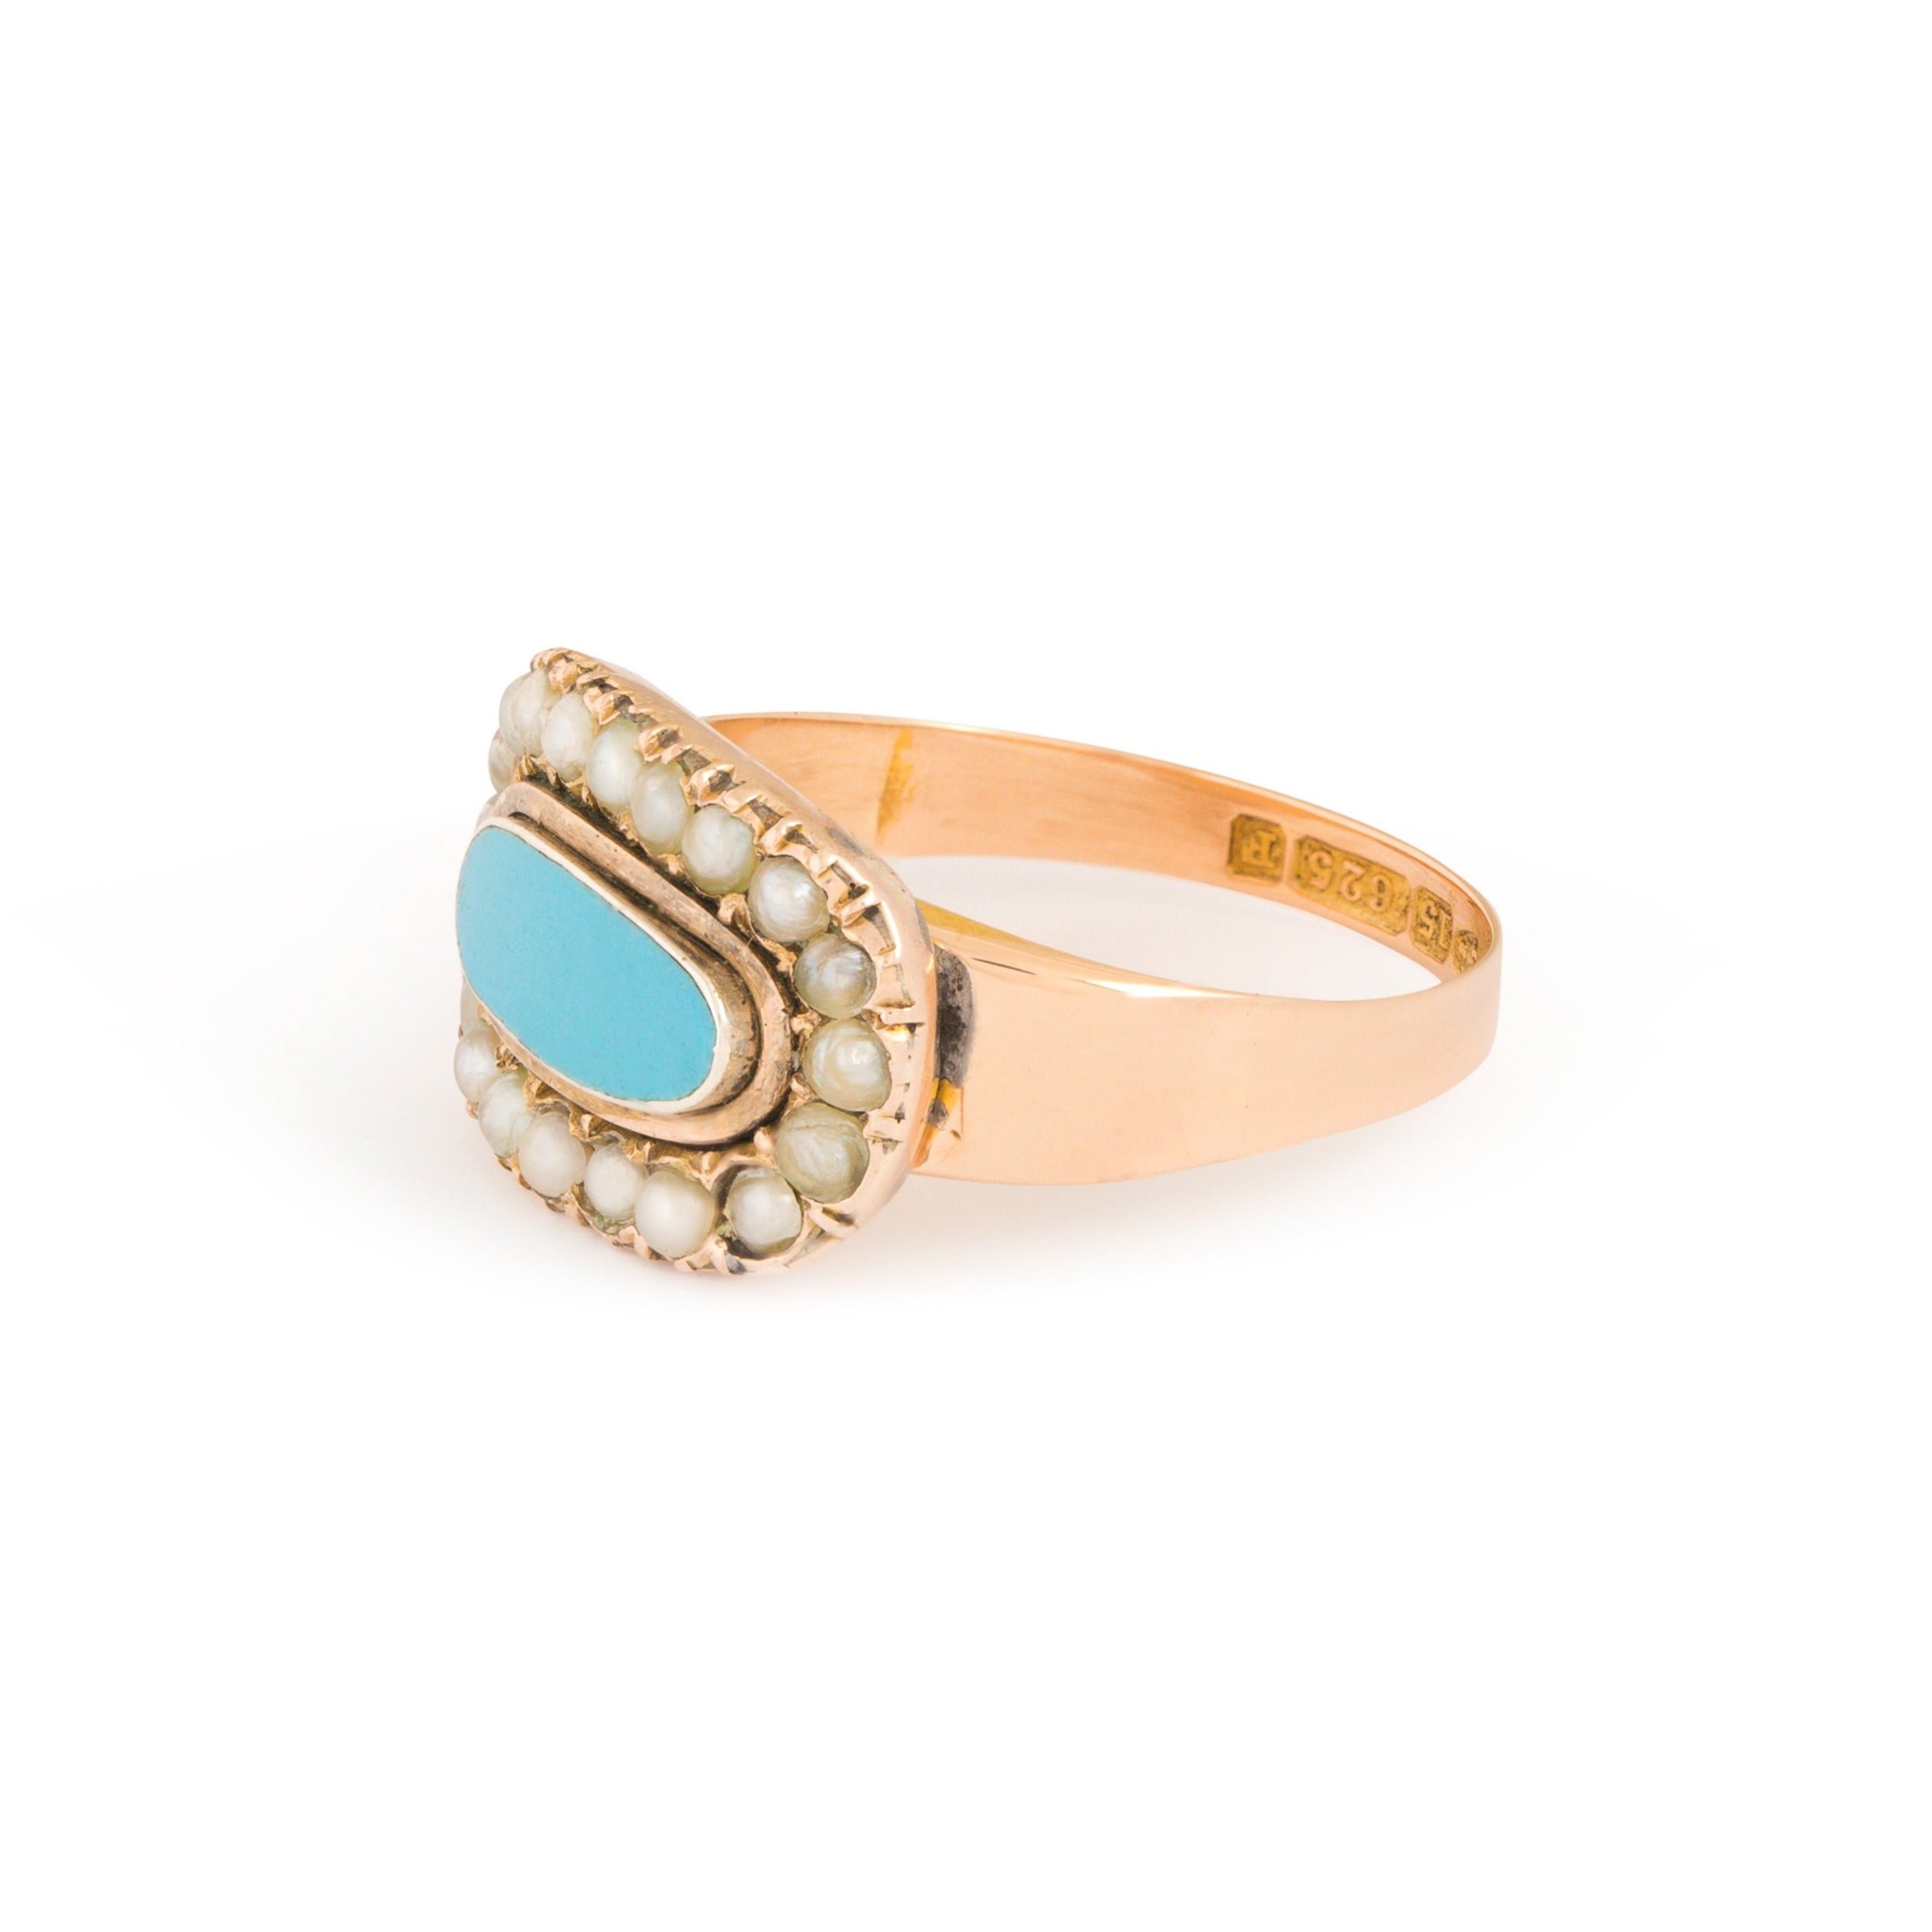 Victorian English Blue Enamel and Pearl 15k Gold Ring